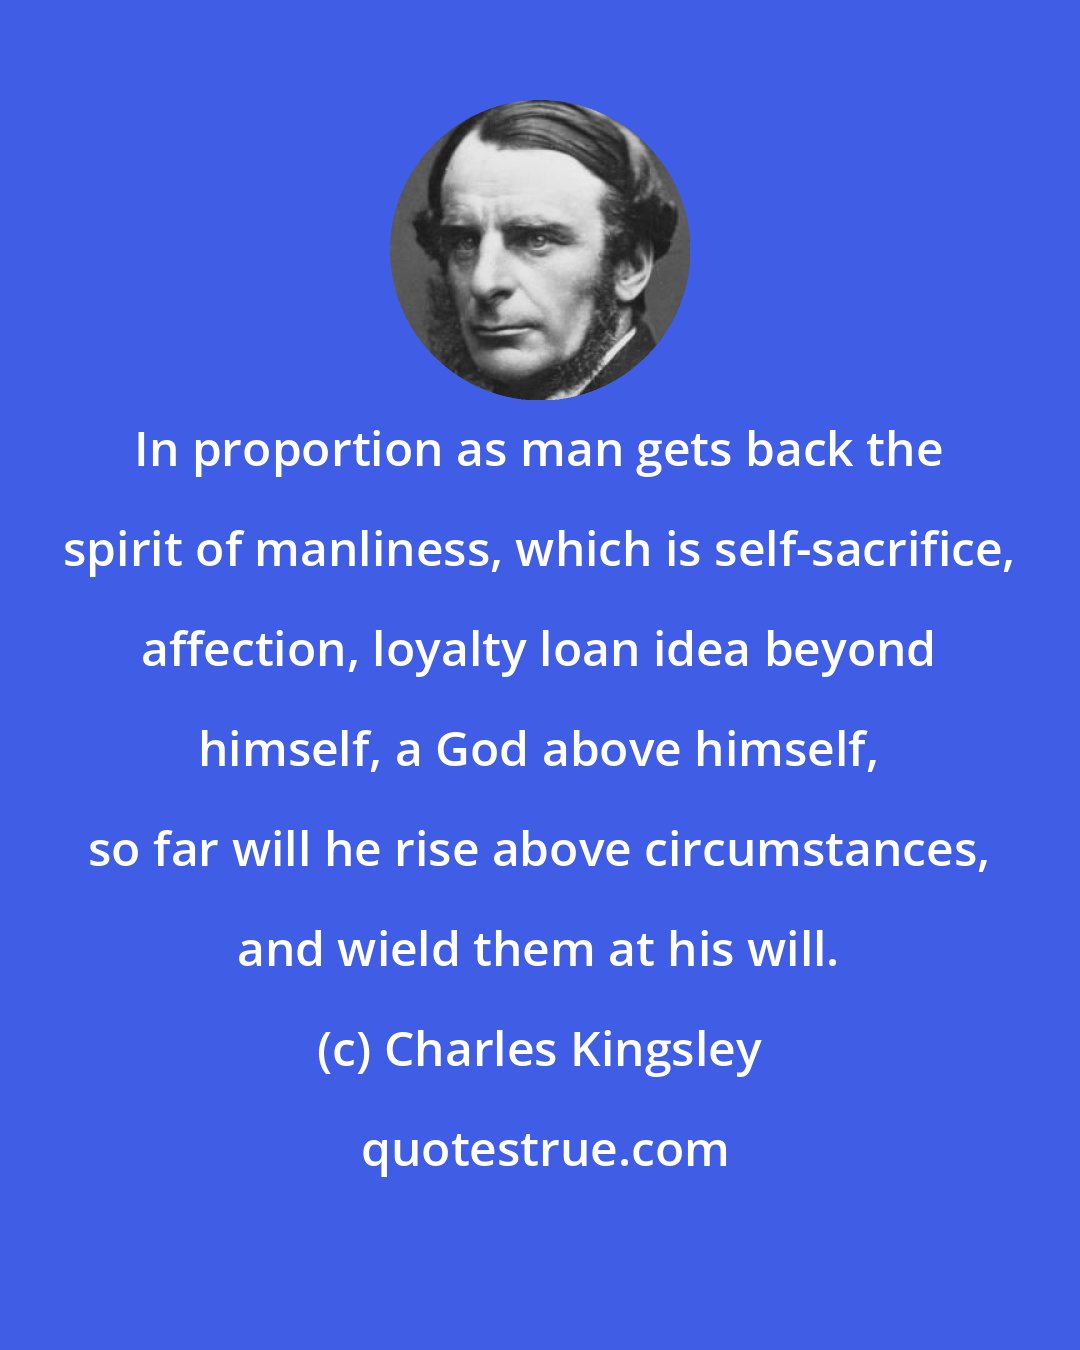 Charles Kingsley: In proportion as man gets back the spirit of manliness, which is self-sacrifice, affection, loyalty loan idea beyond himself, a God above himself, so far will he rise above circumstances, and wield them at his will.